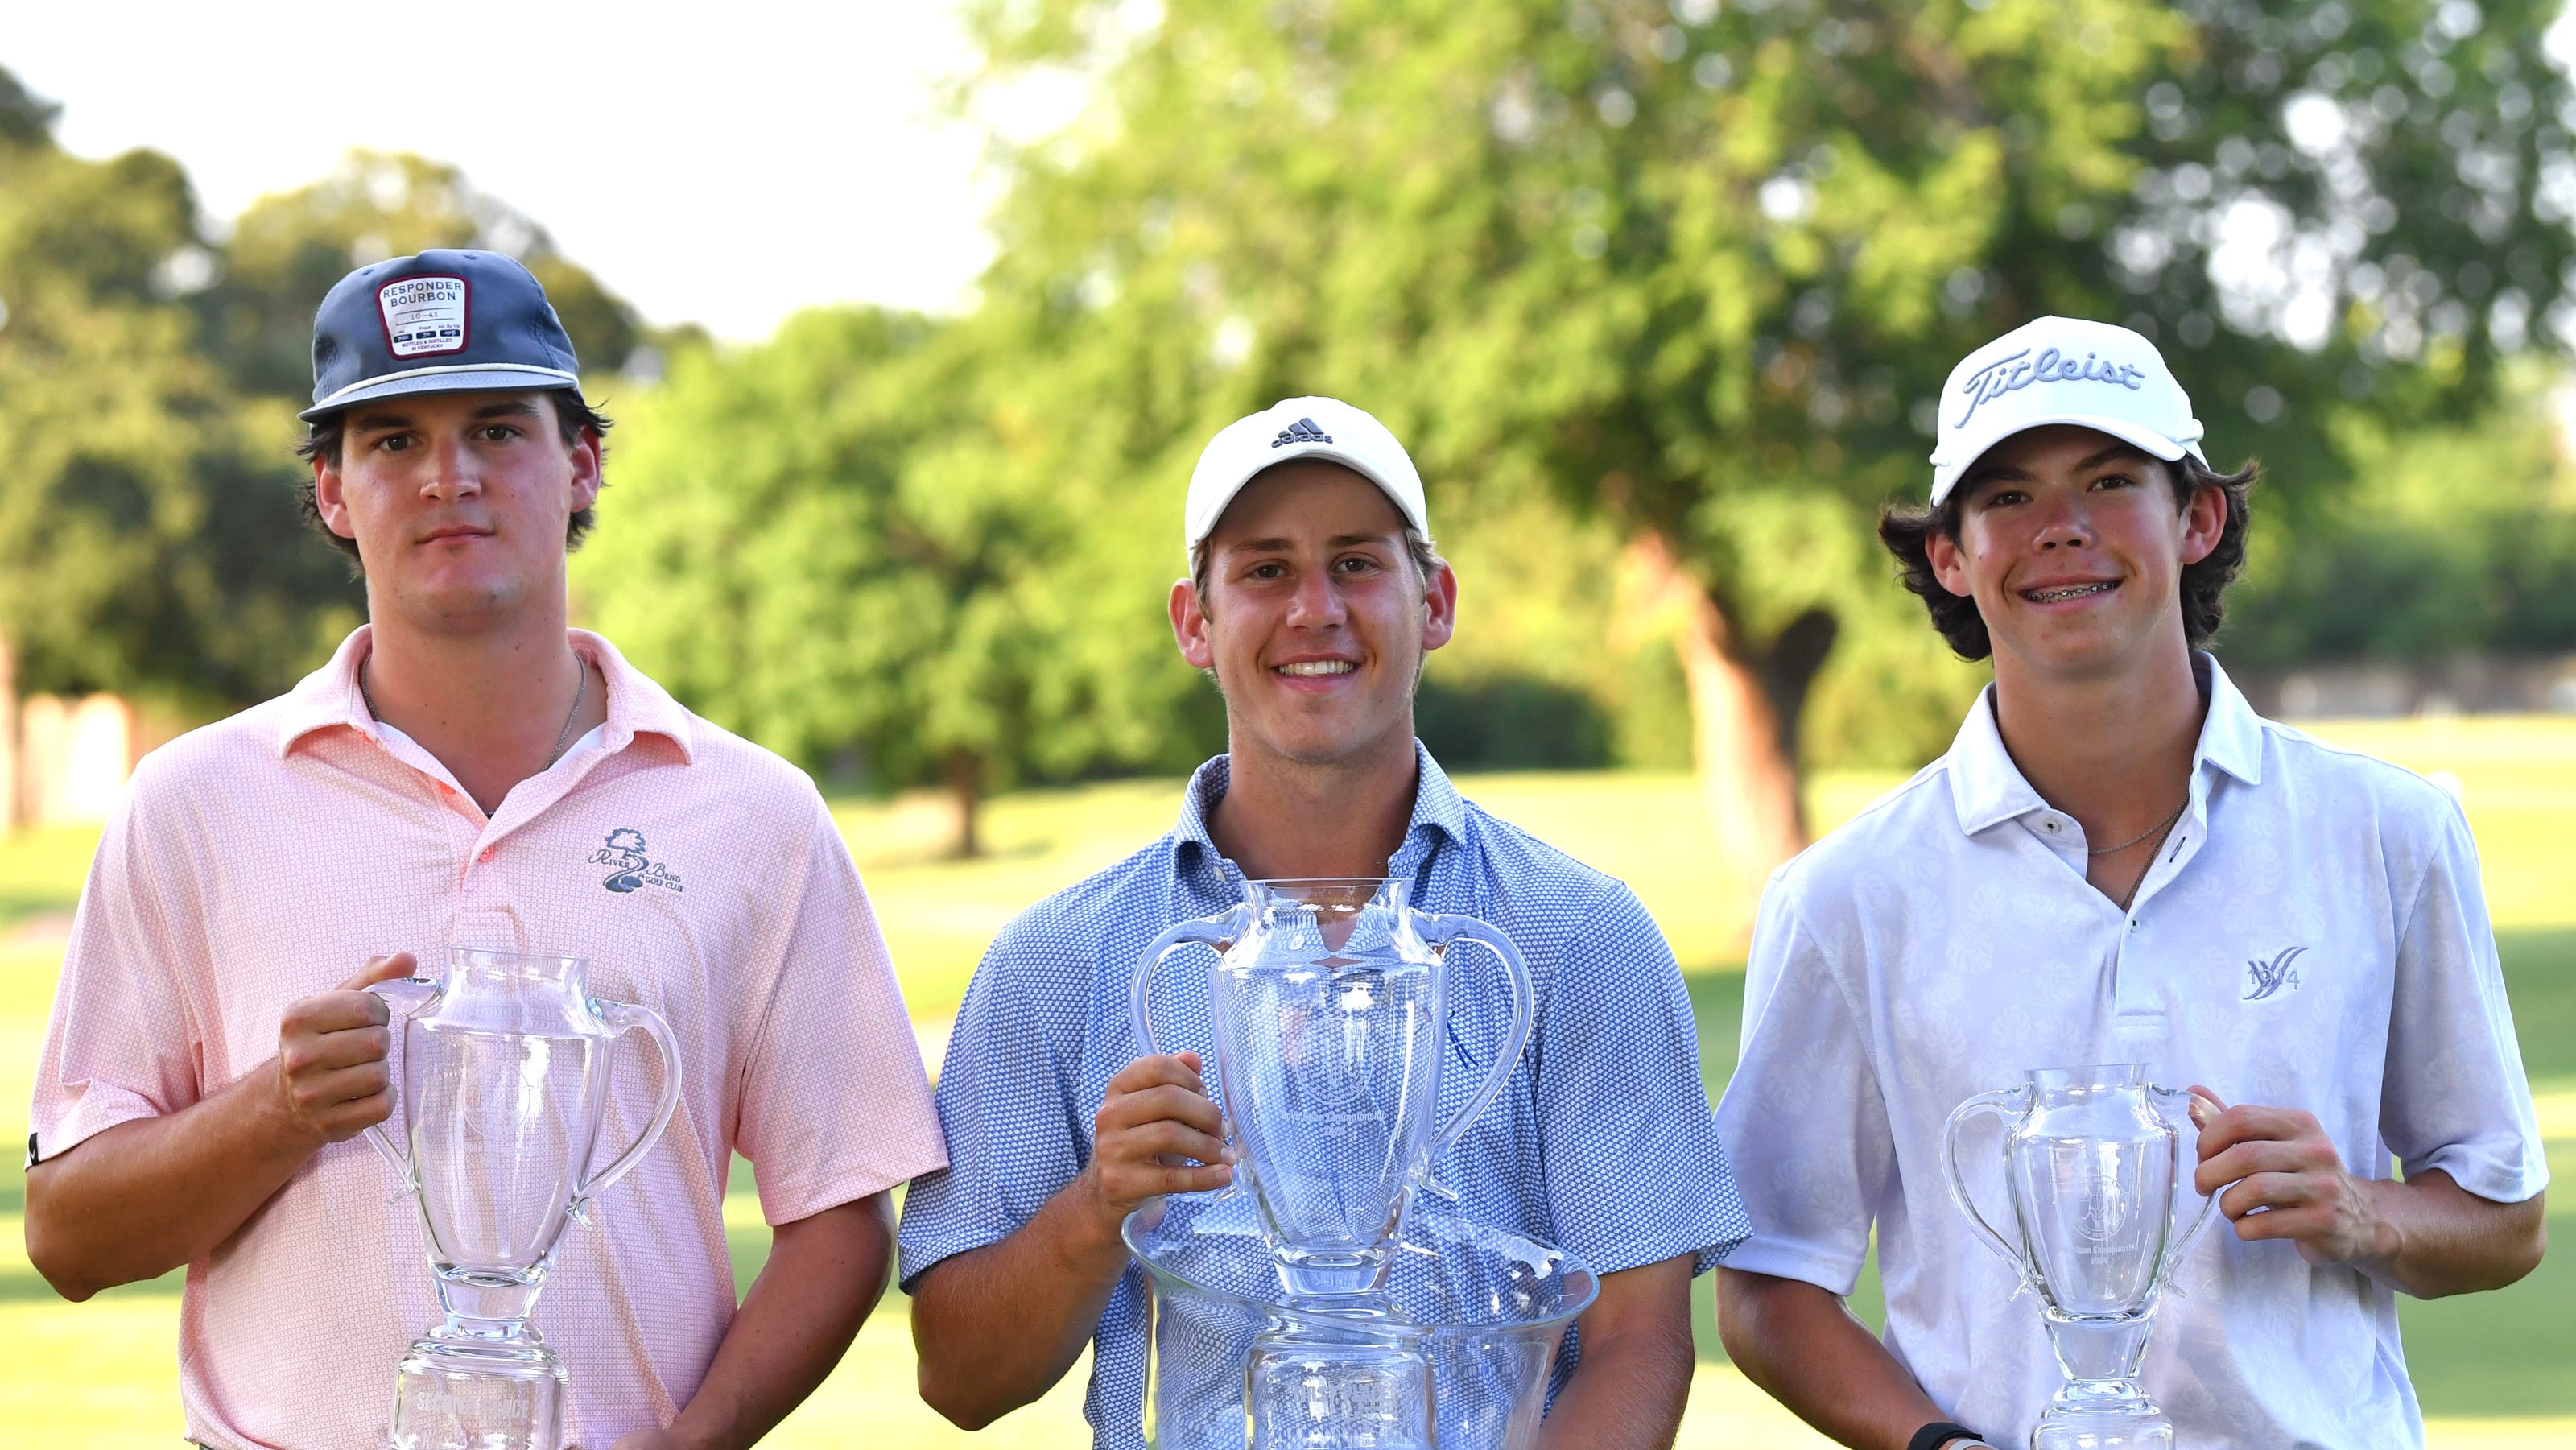   
																Golf players from Texas and Oklahoma compete in three day tournament. 
															 